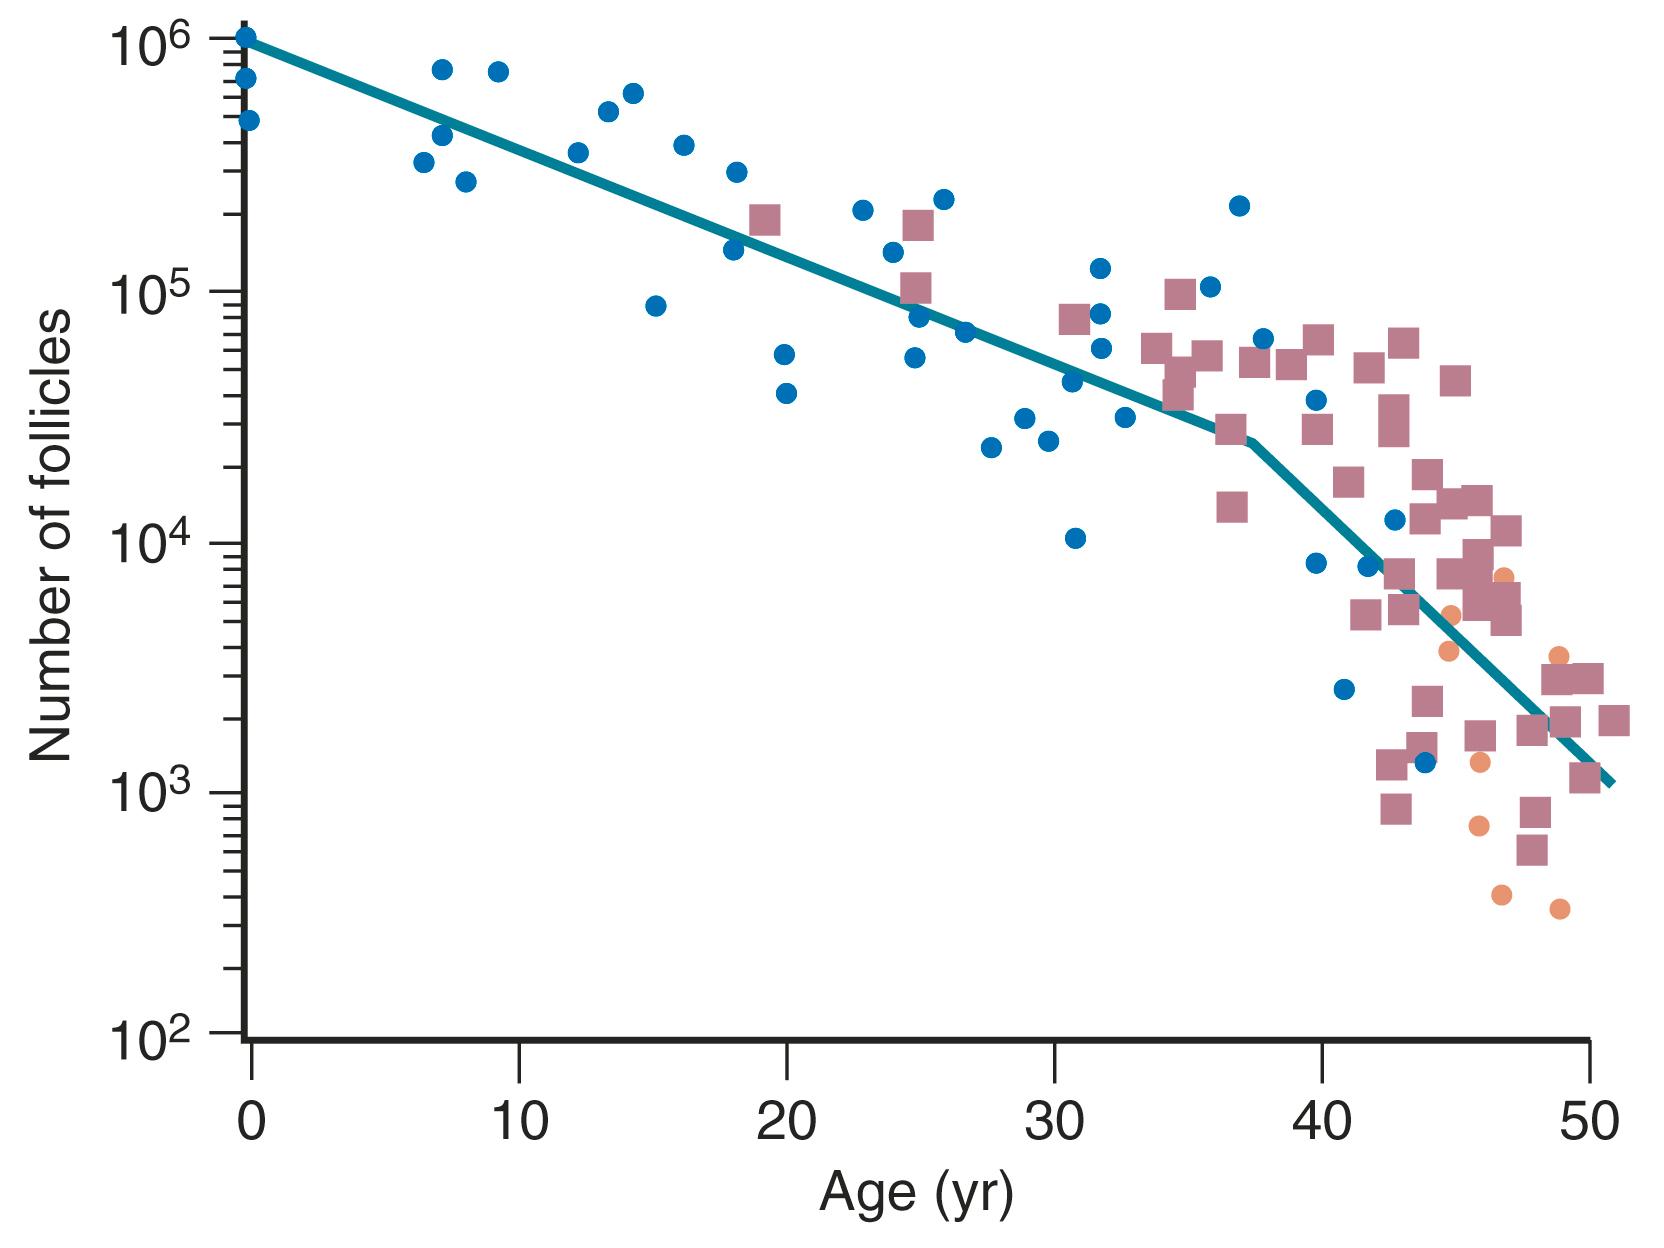 Fig. 14.4, The age-related decrease in the total number of primordial follicles (PFs) within both human ovaries from birth to menopause.